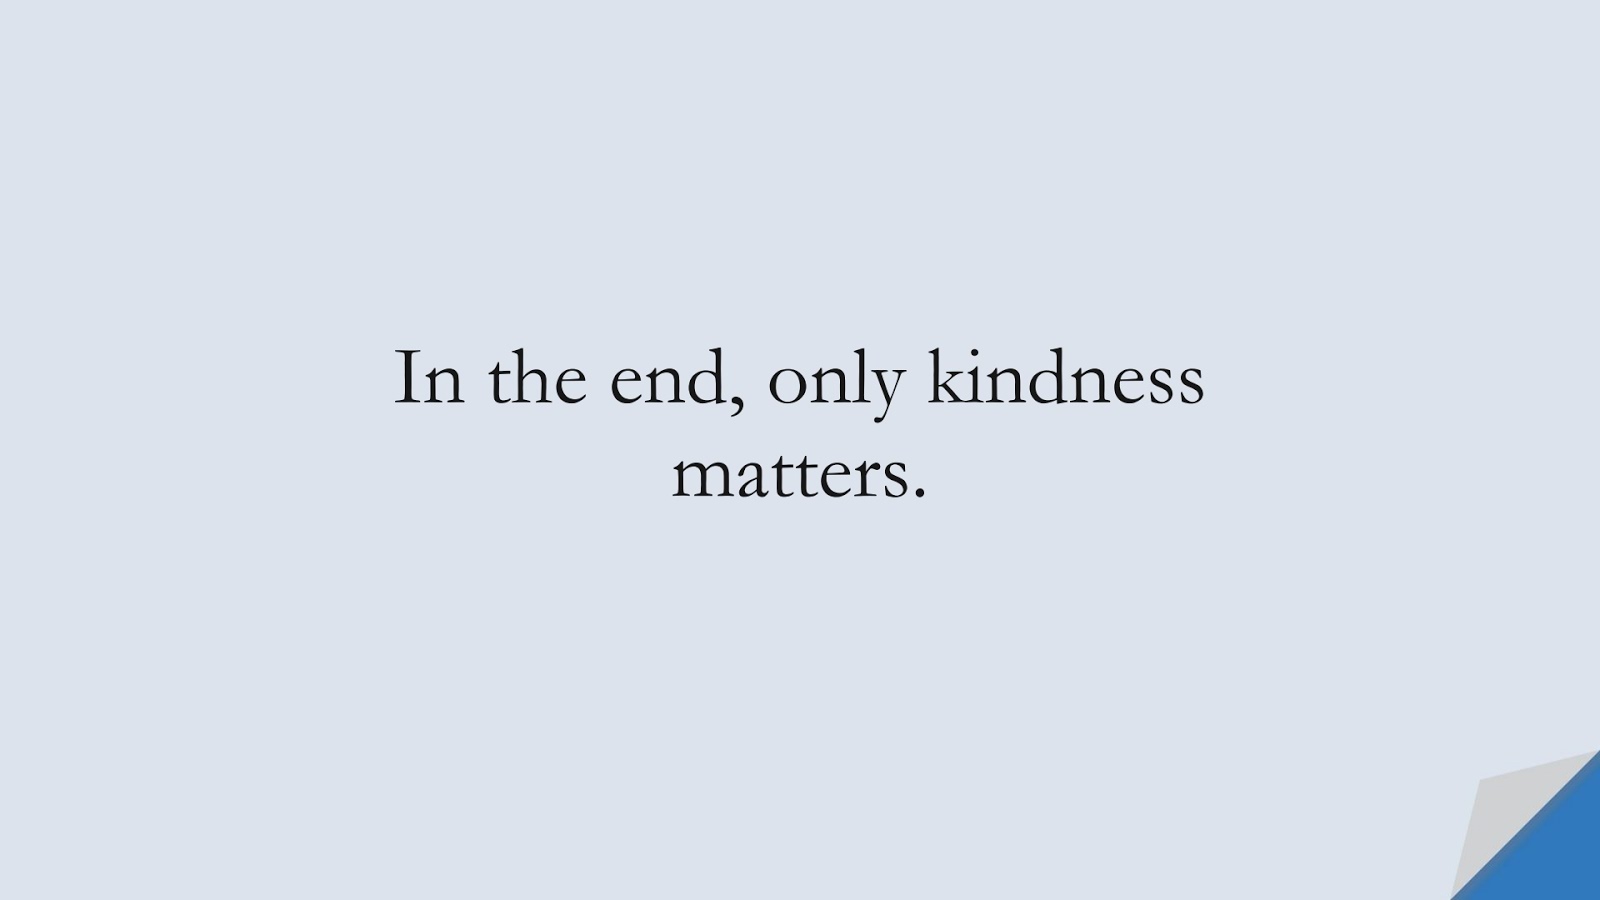 In the end, only kindness matters.FALSE